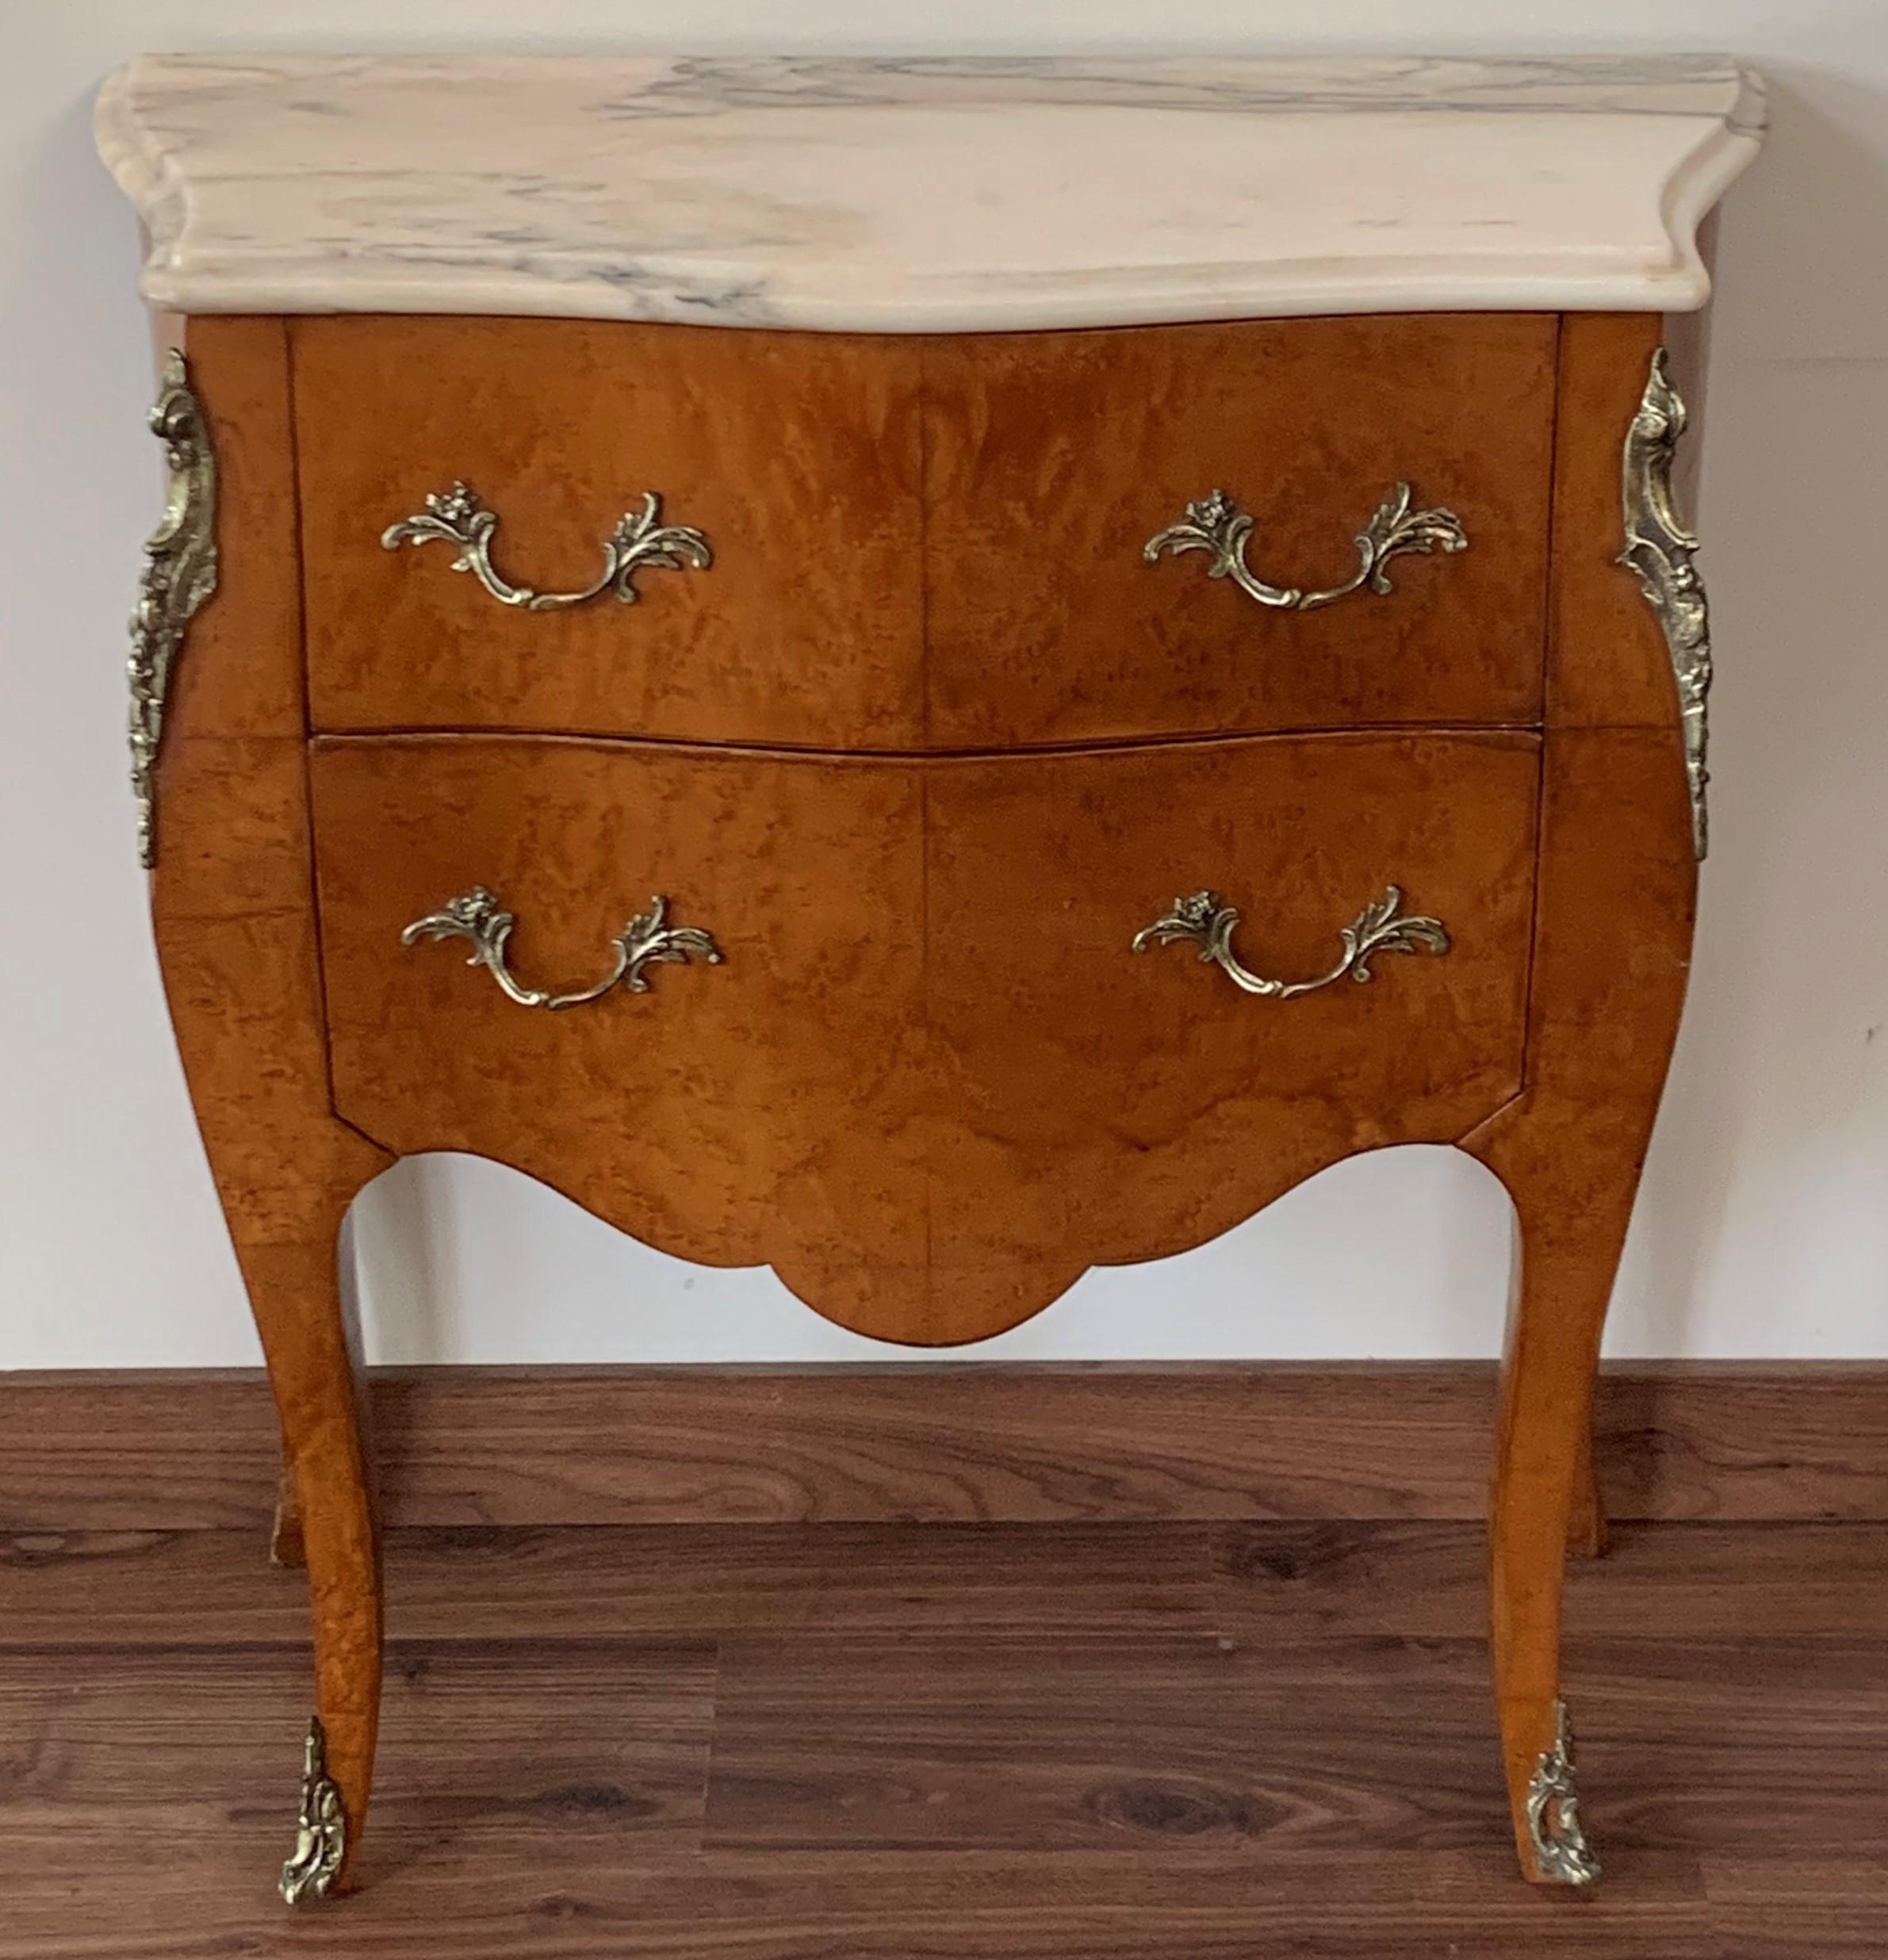 20th century pair of Italian fruitwood two drawers nightstands or bedside commodes with bronze hardware.